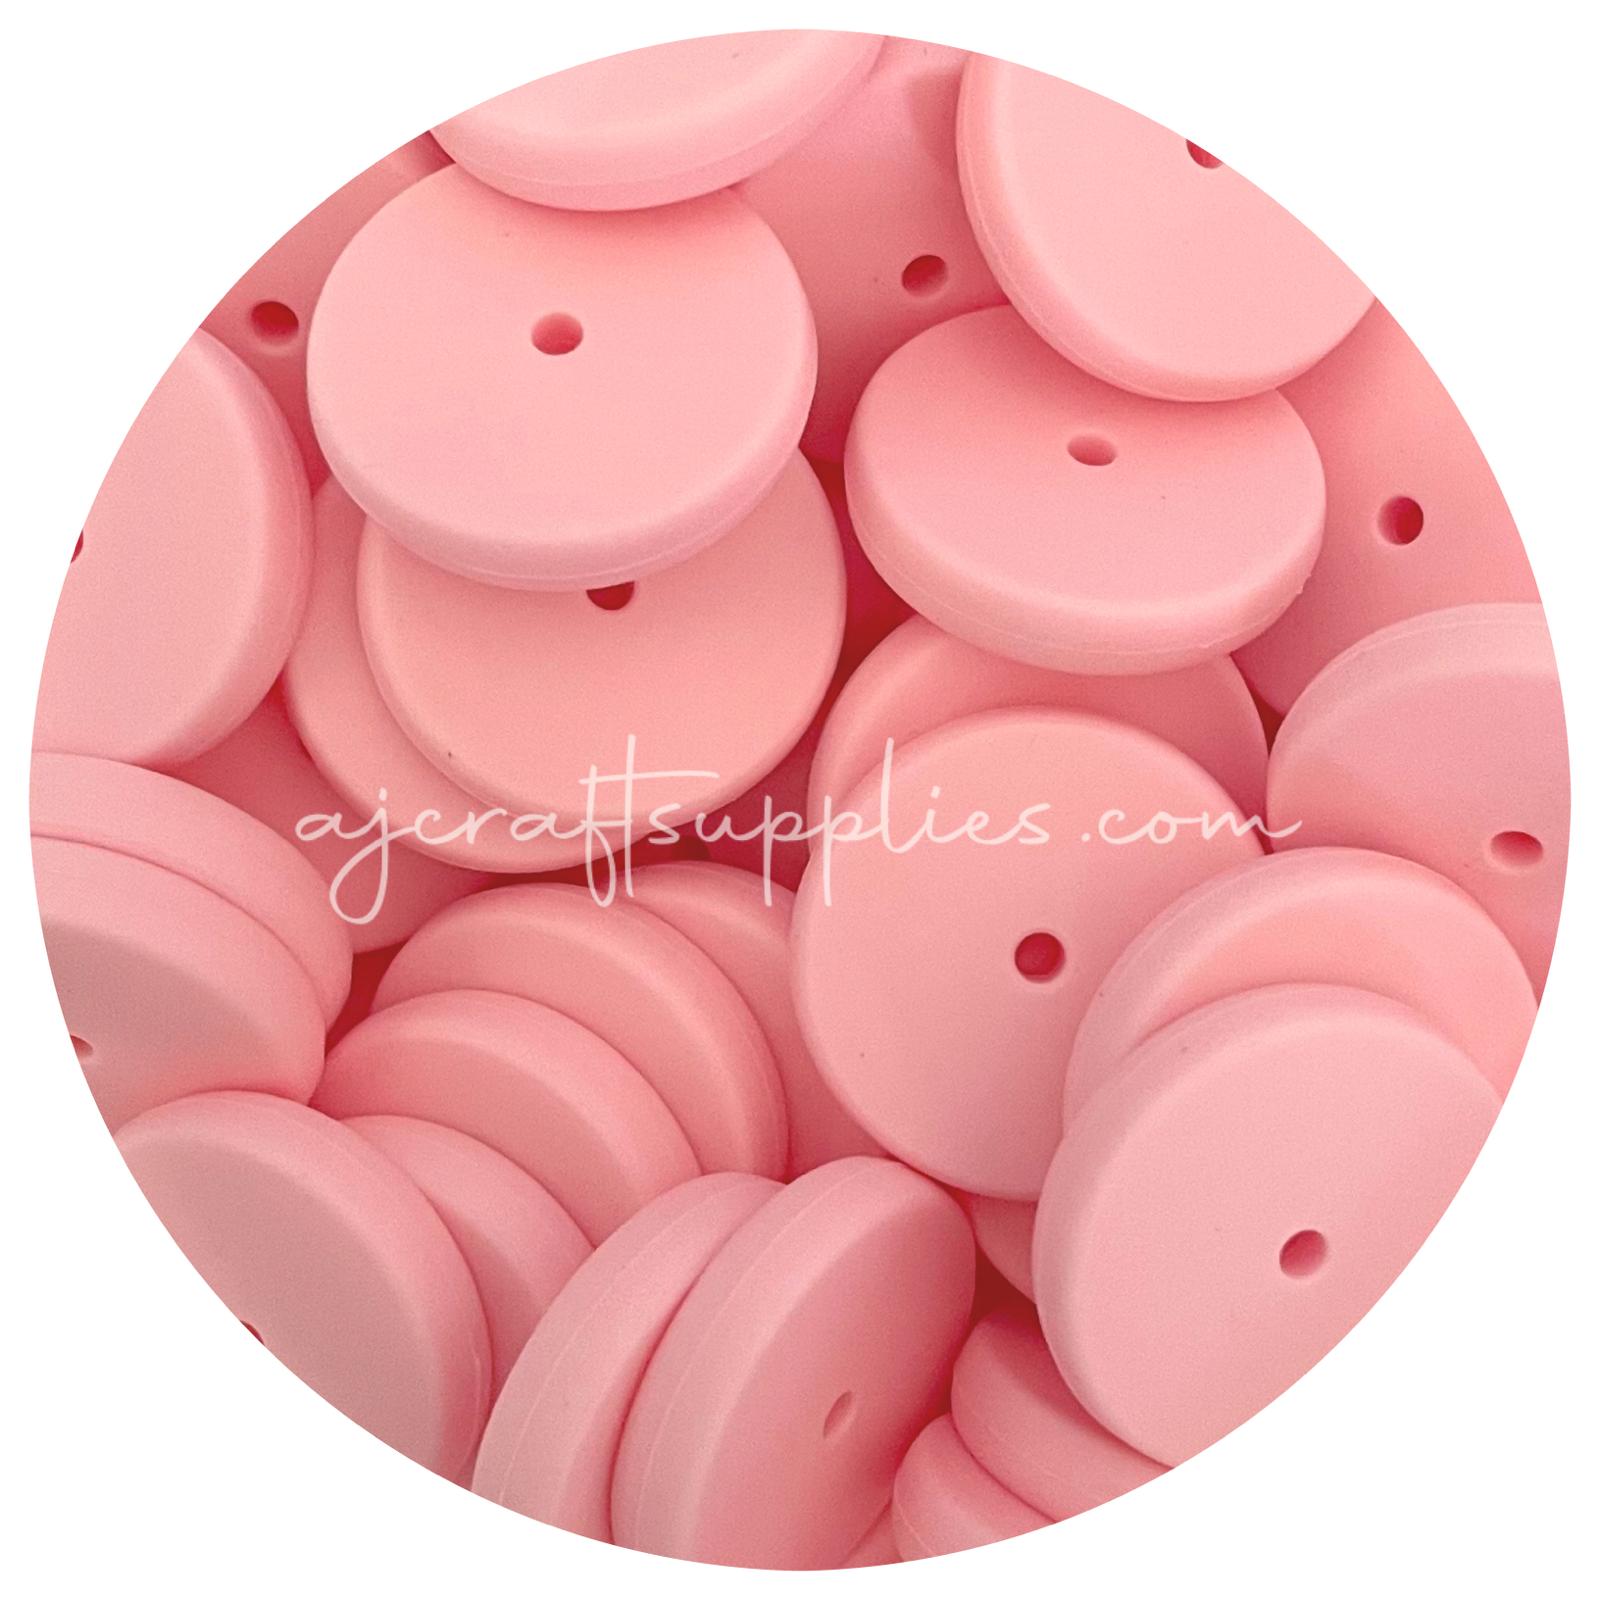 Candy Pink - 25mm Flat Coin Silicone Beads - 5 beads